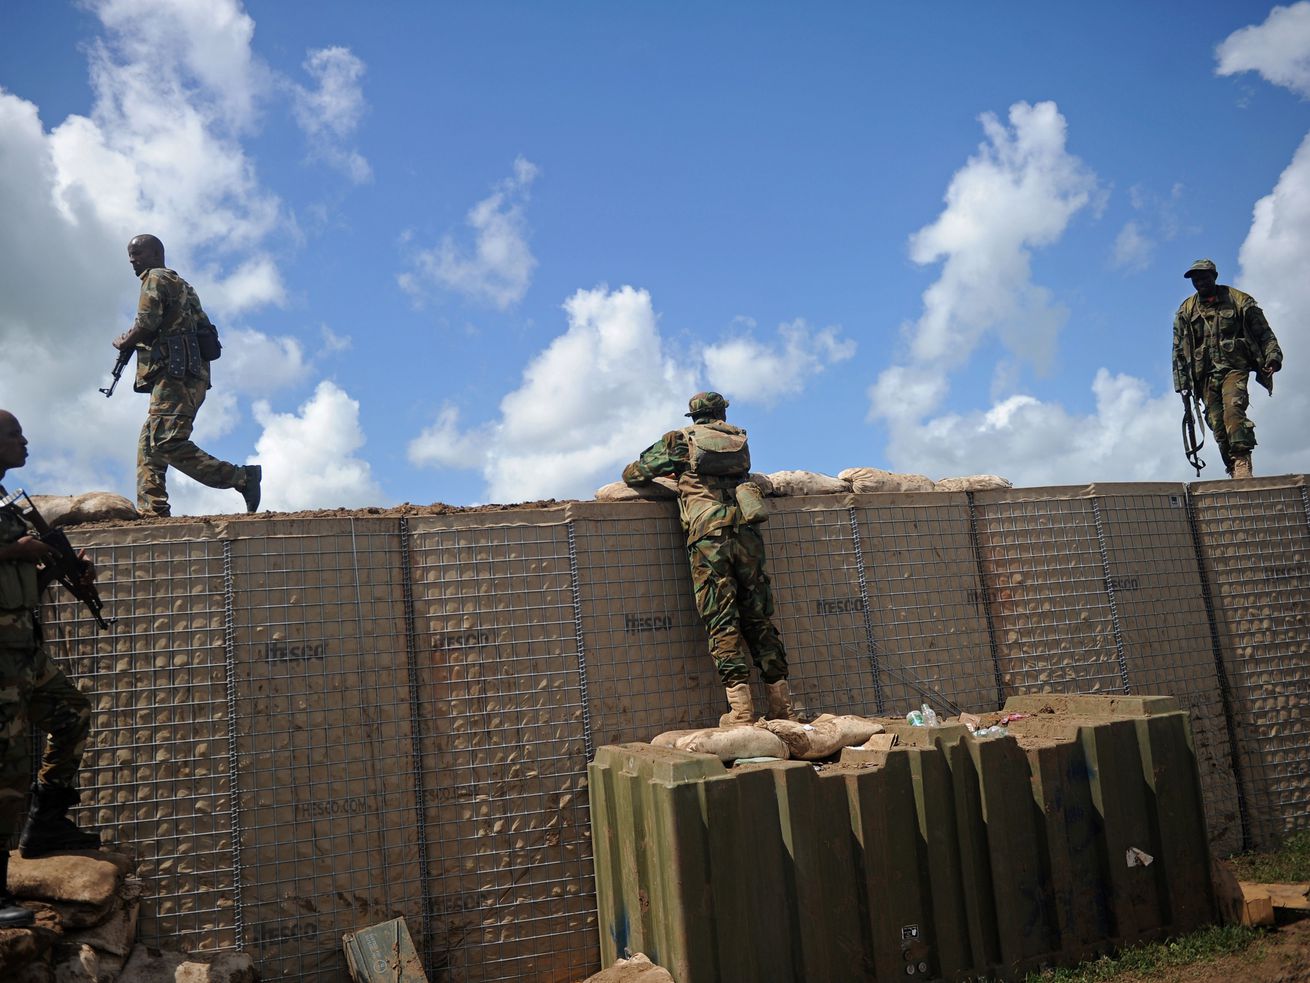 Soldiers atop a barricade wall.